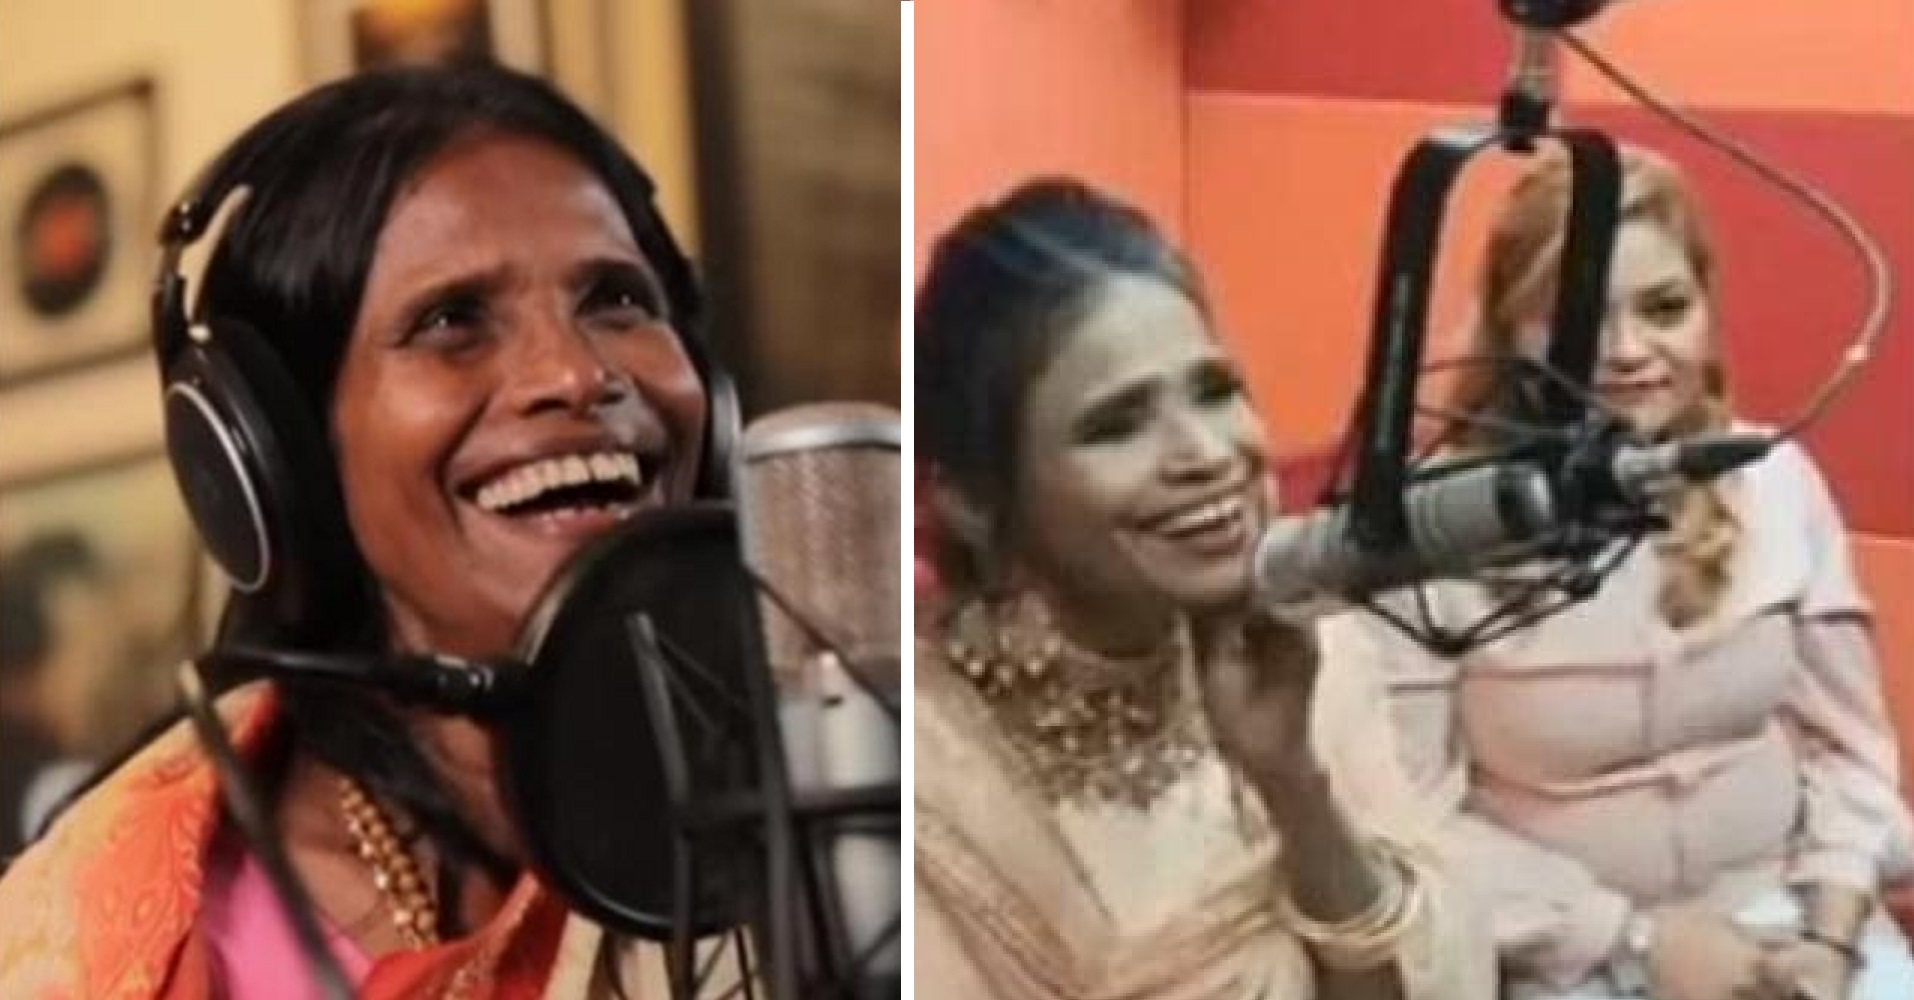 From Railway Station to Radio Station: Ranu Mondal Sings at Red FM Studio in New Viral Video!